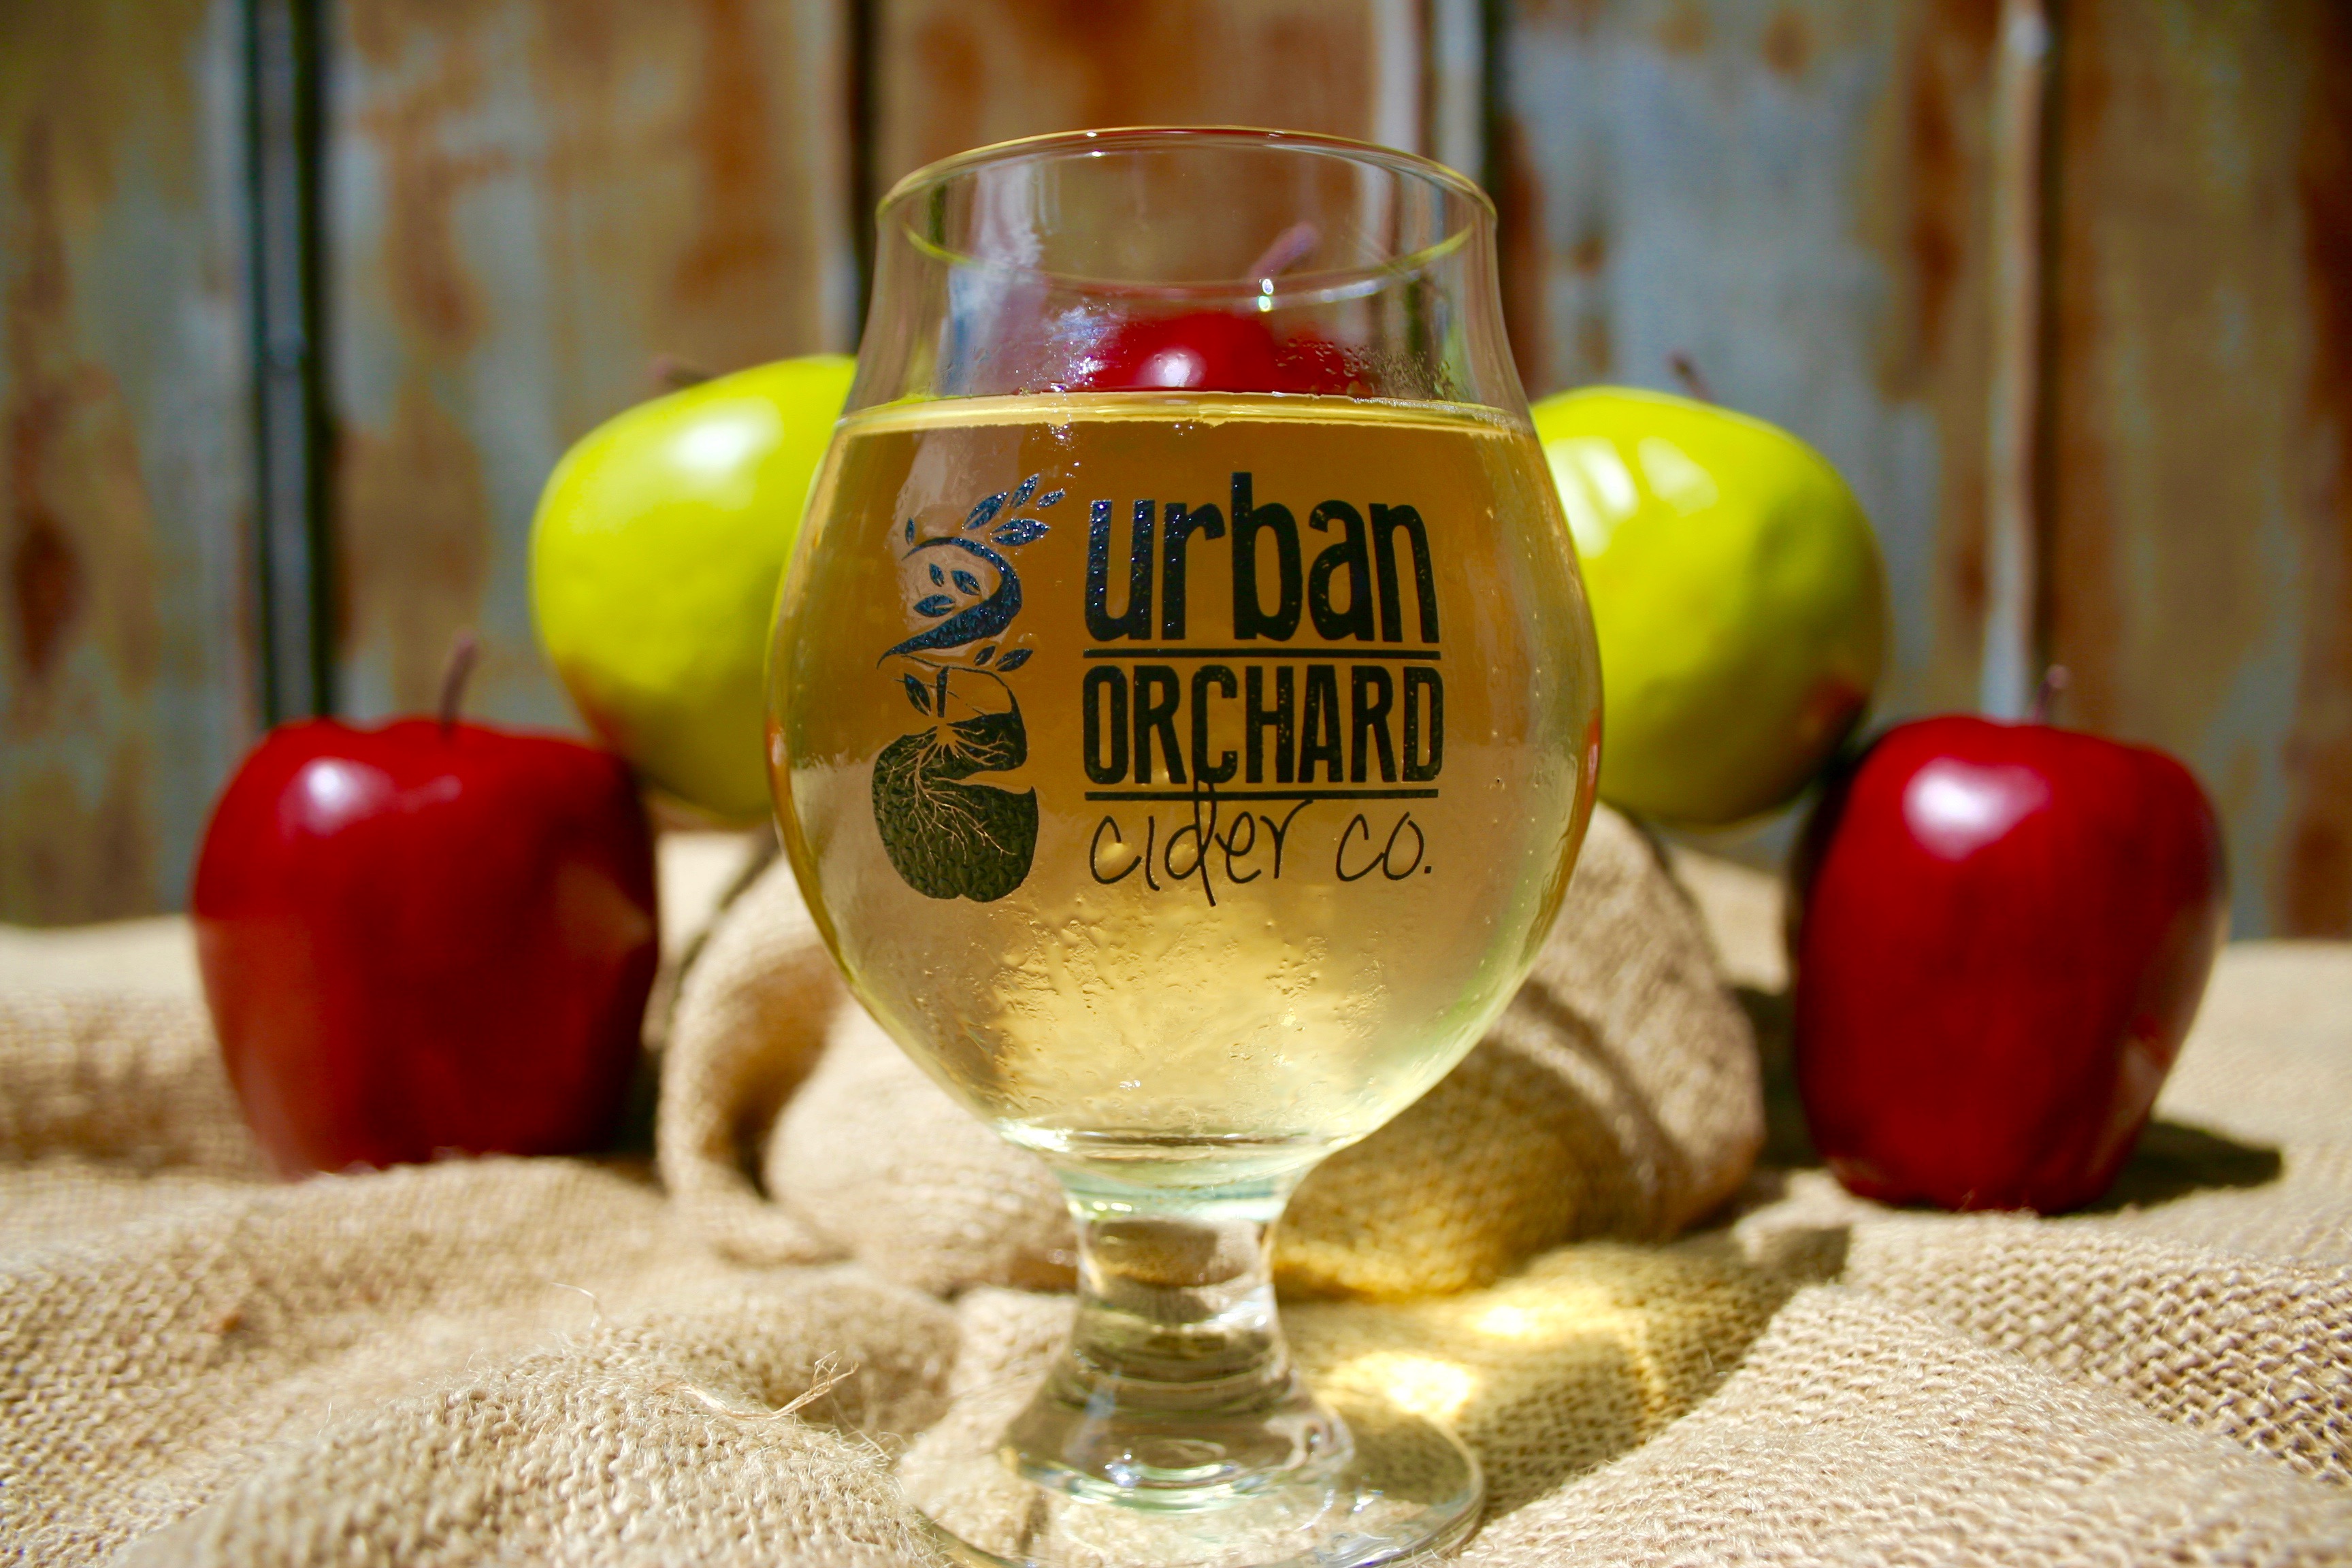 Local Cideries Celebrate Fall Fruit, Industry Growth and CiderFest NC post image